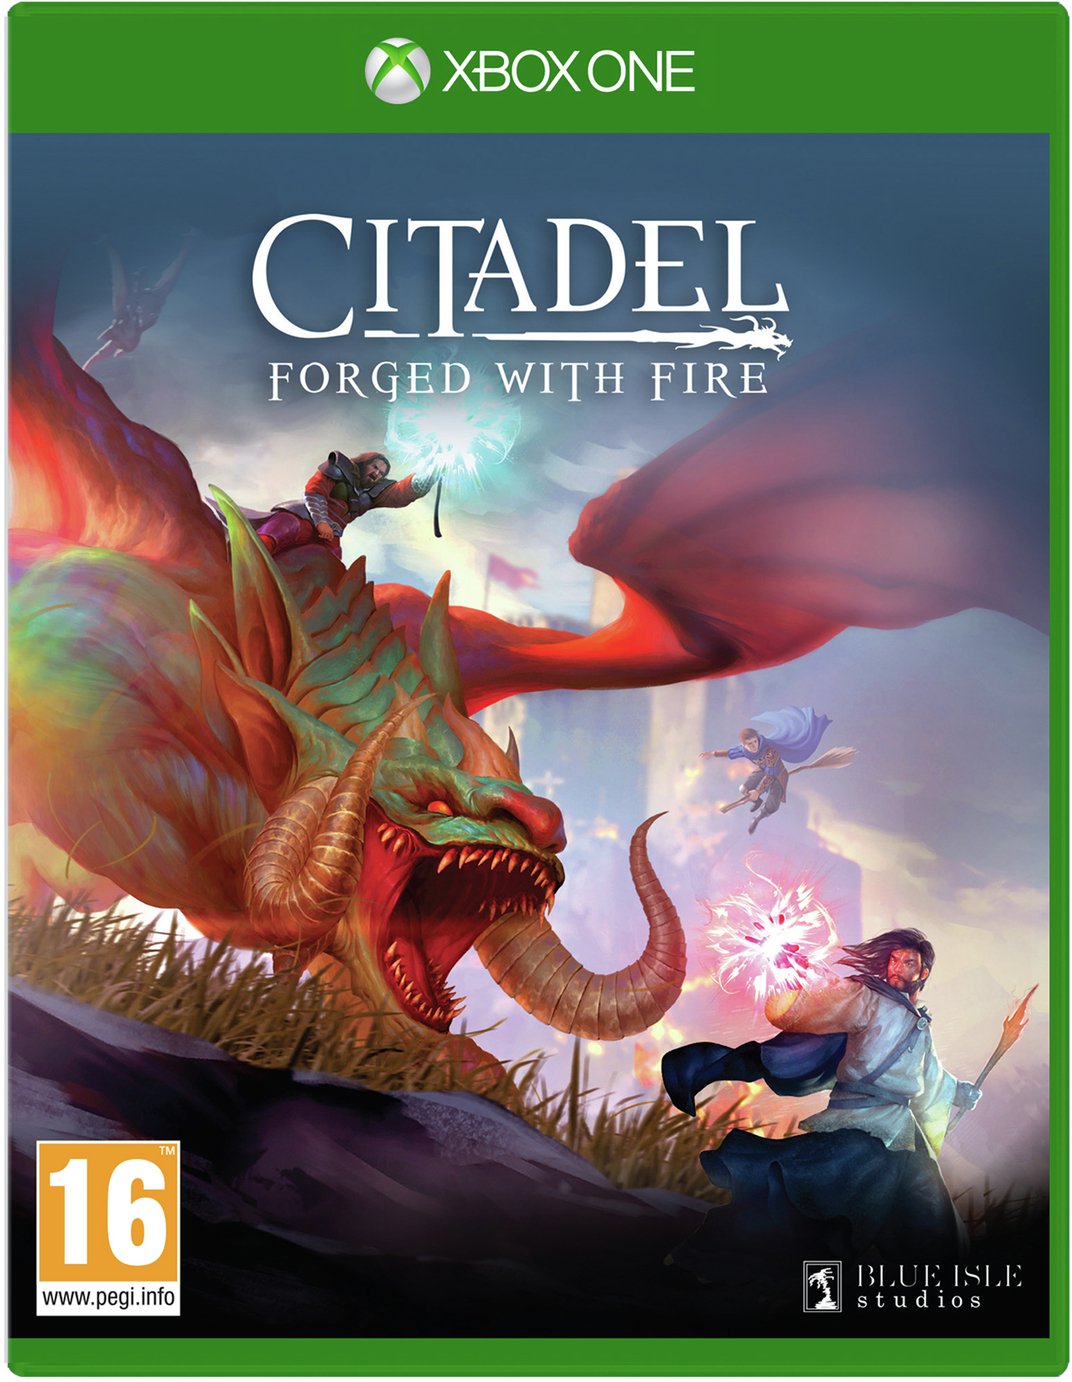 Citadel: Forged With Fire Xbox One Game